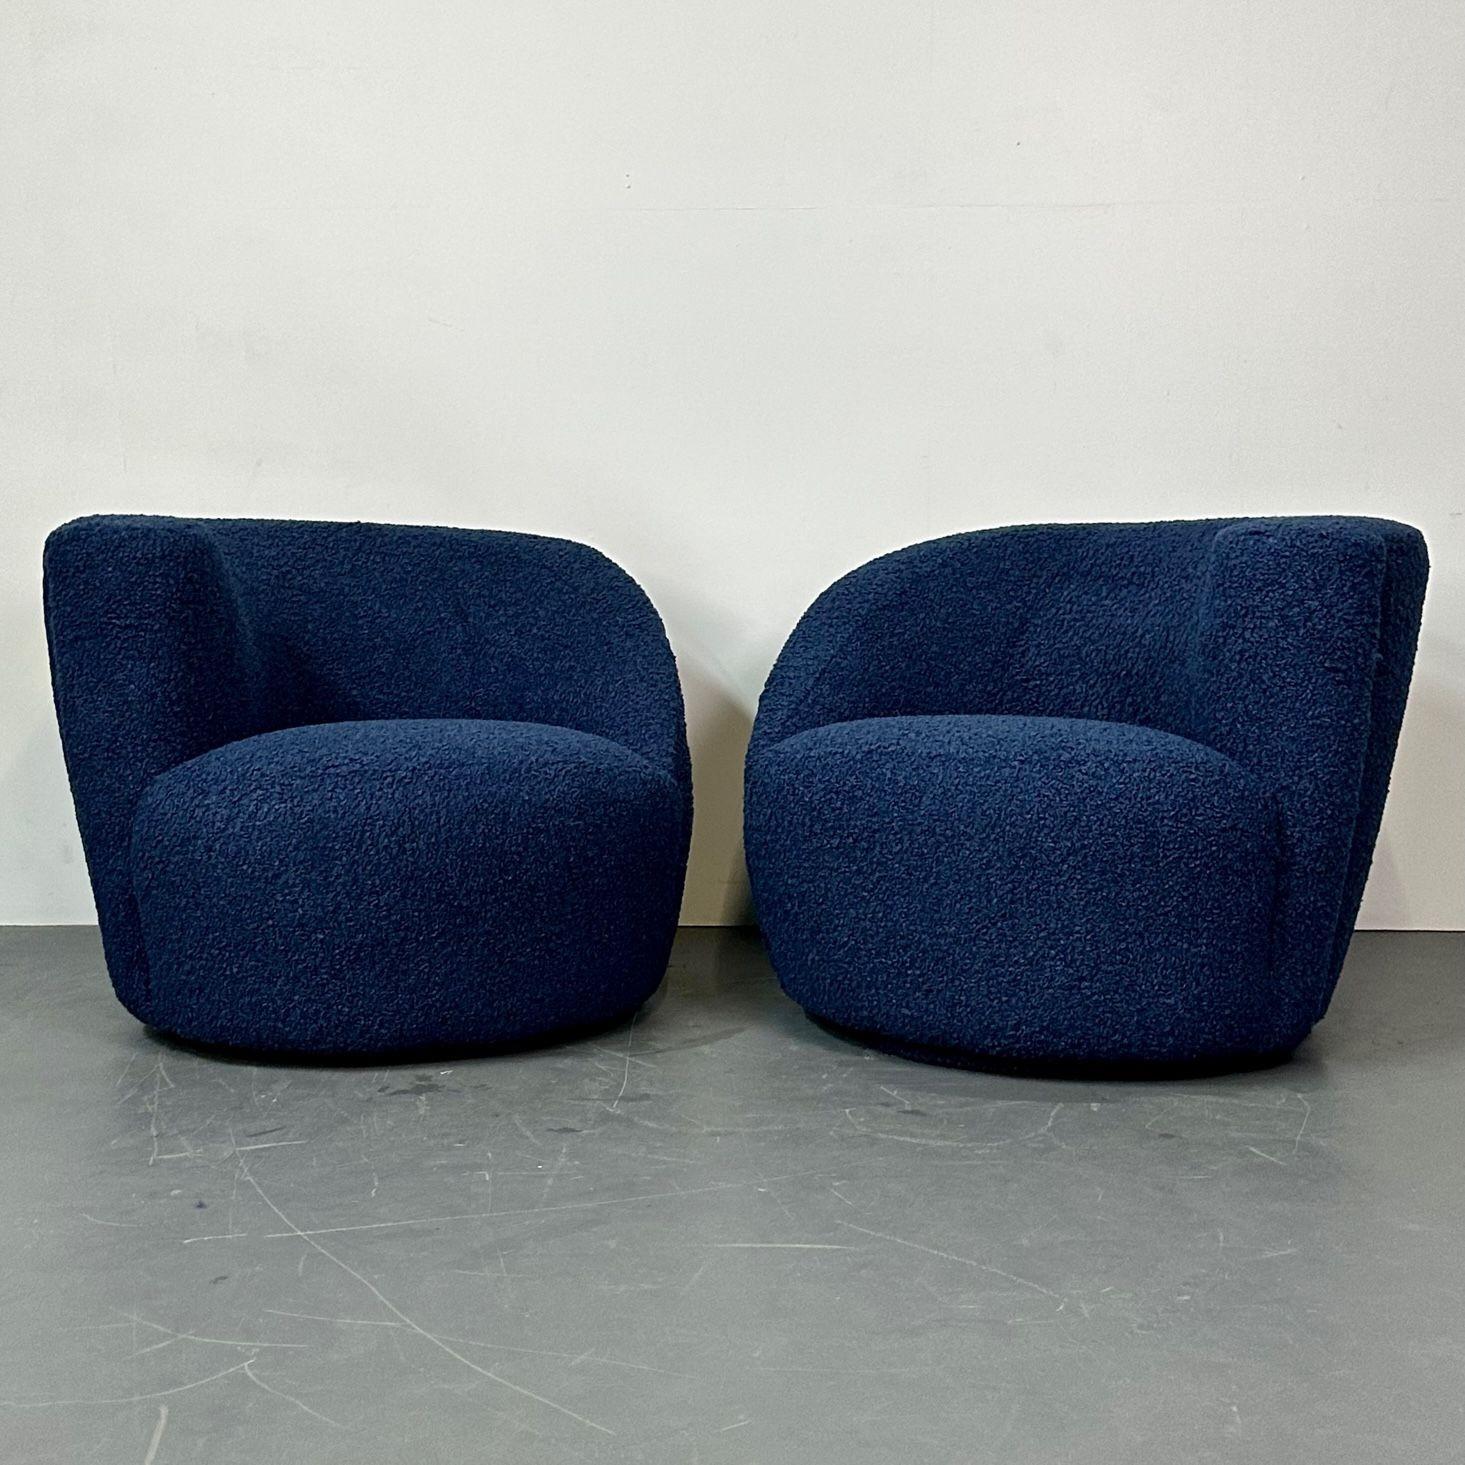 Pair of Mid-Century Modern Nautilus Style Swivel / Lounge Chairs, Blue Faux Fur
Opposing organic form kidney shaped swivel chairs newly upholstered in a fuzzy faux Sherpa boucle esque fabric. This design is similar to that of Vladimir Kagan's iconic